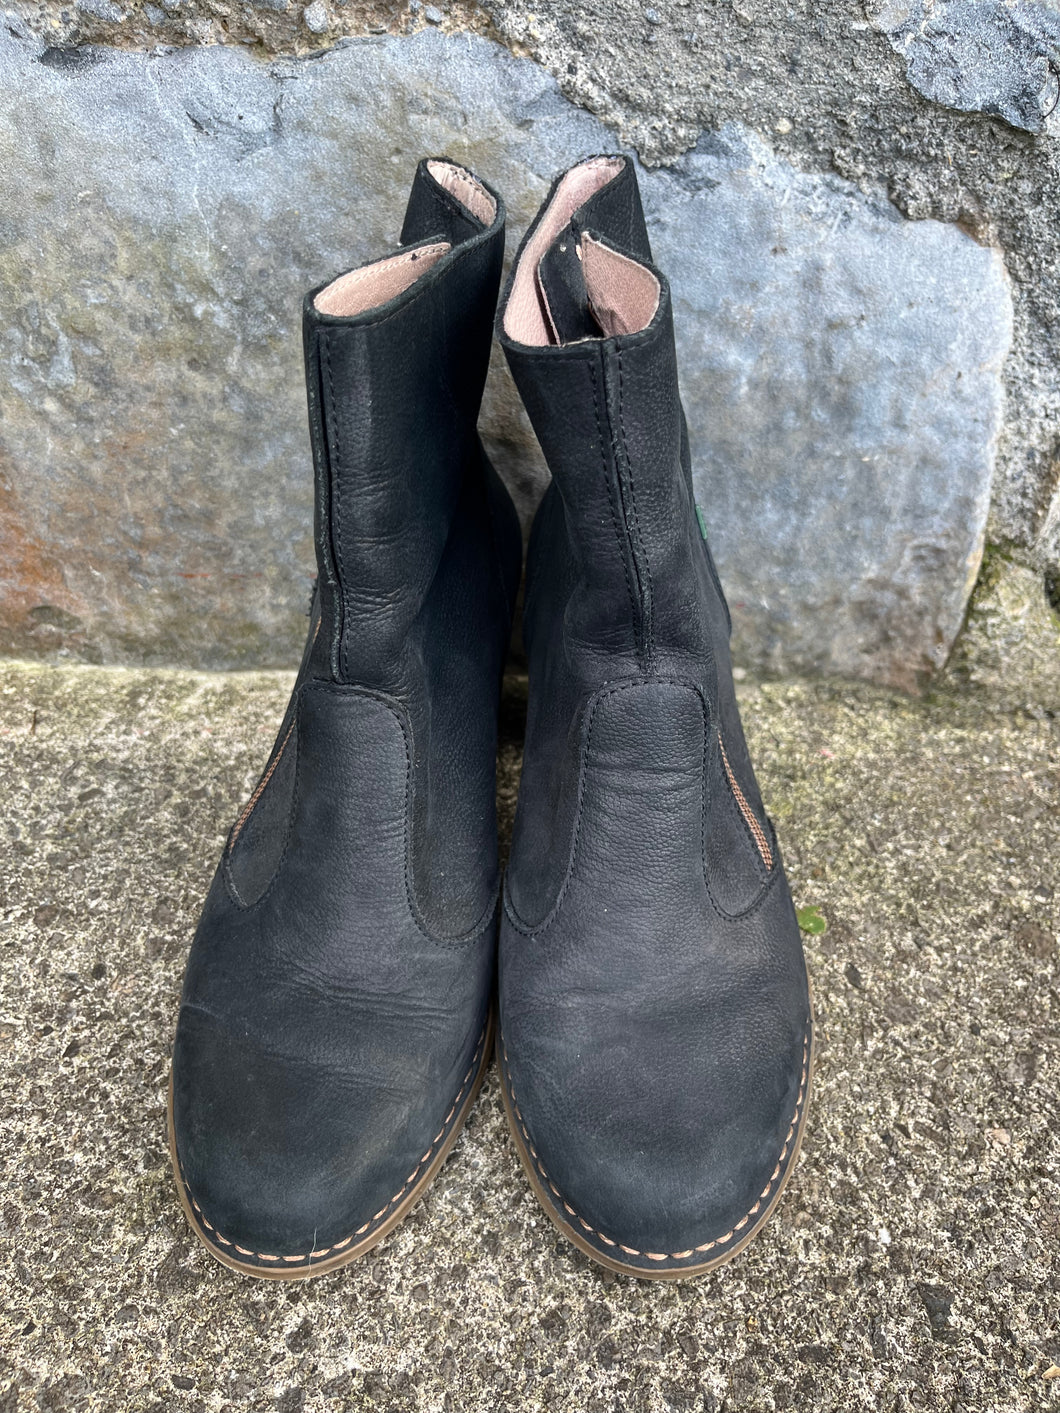 Charcoal leather boots uk 5